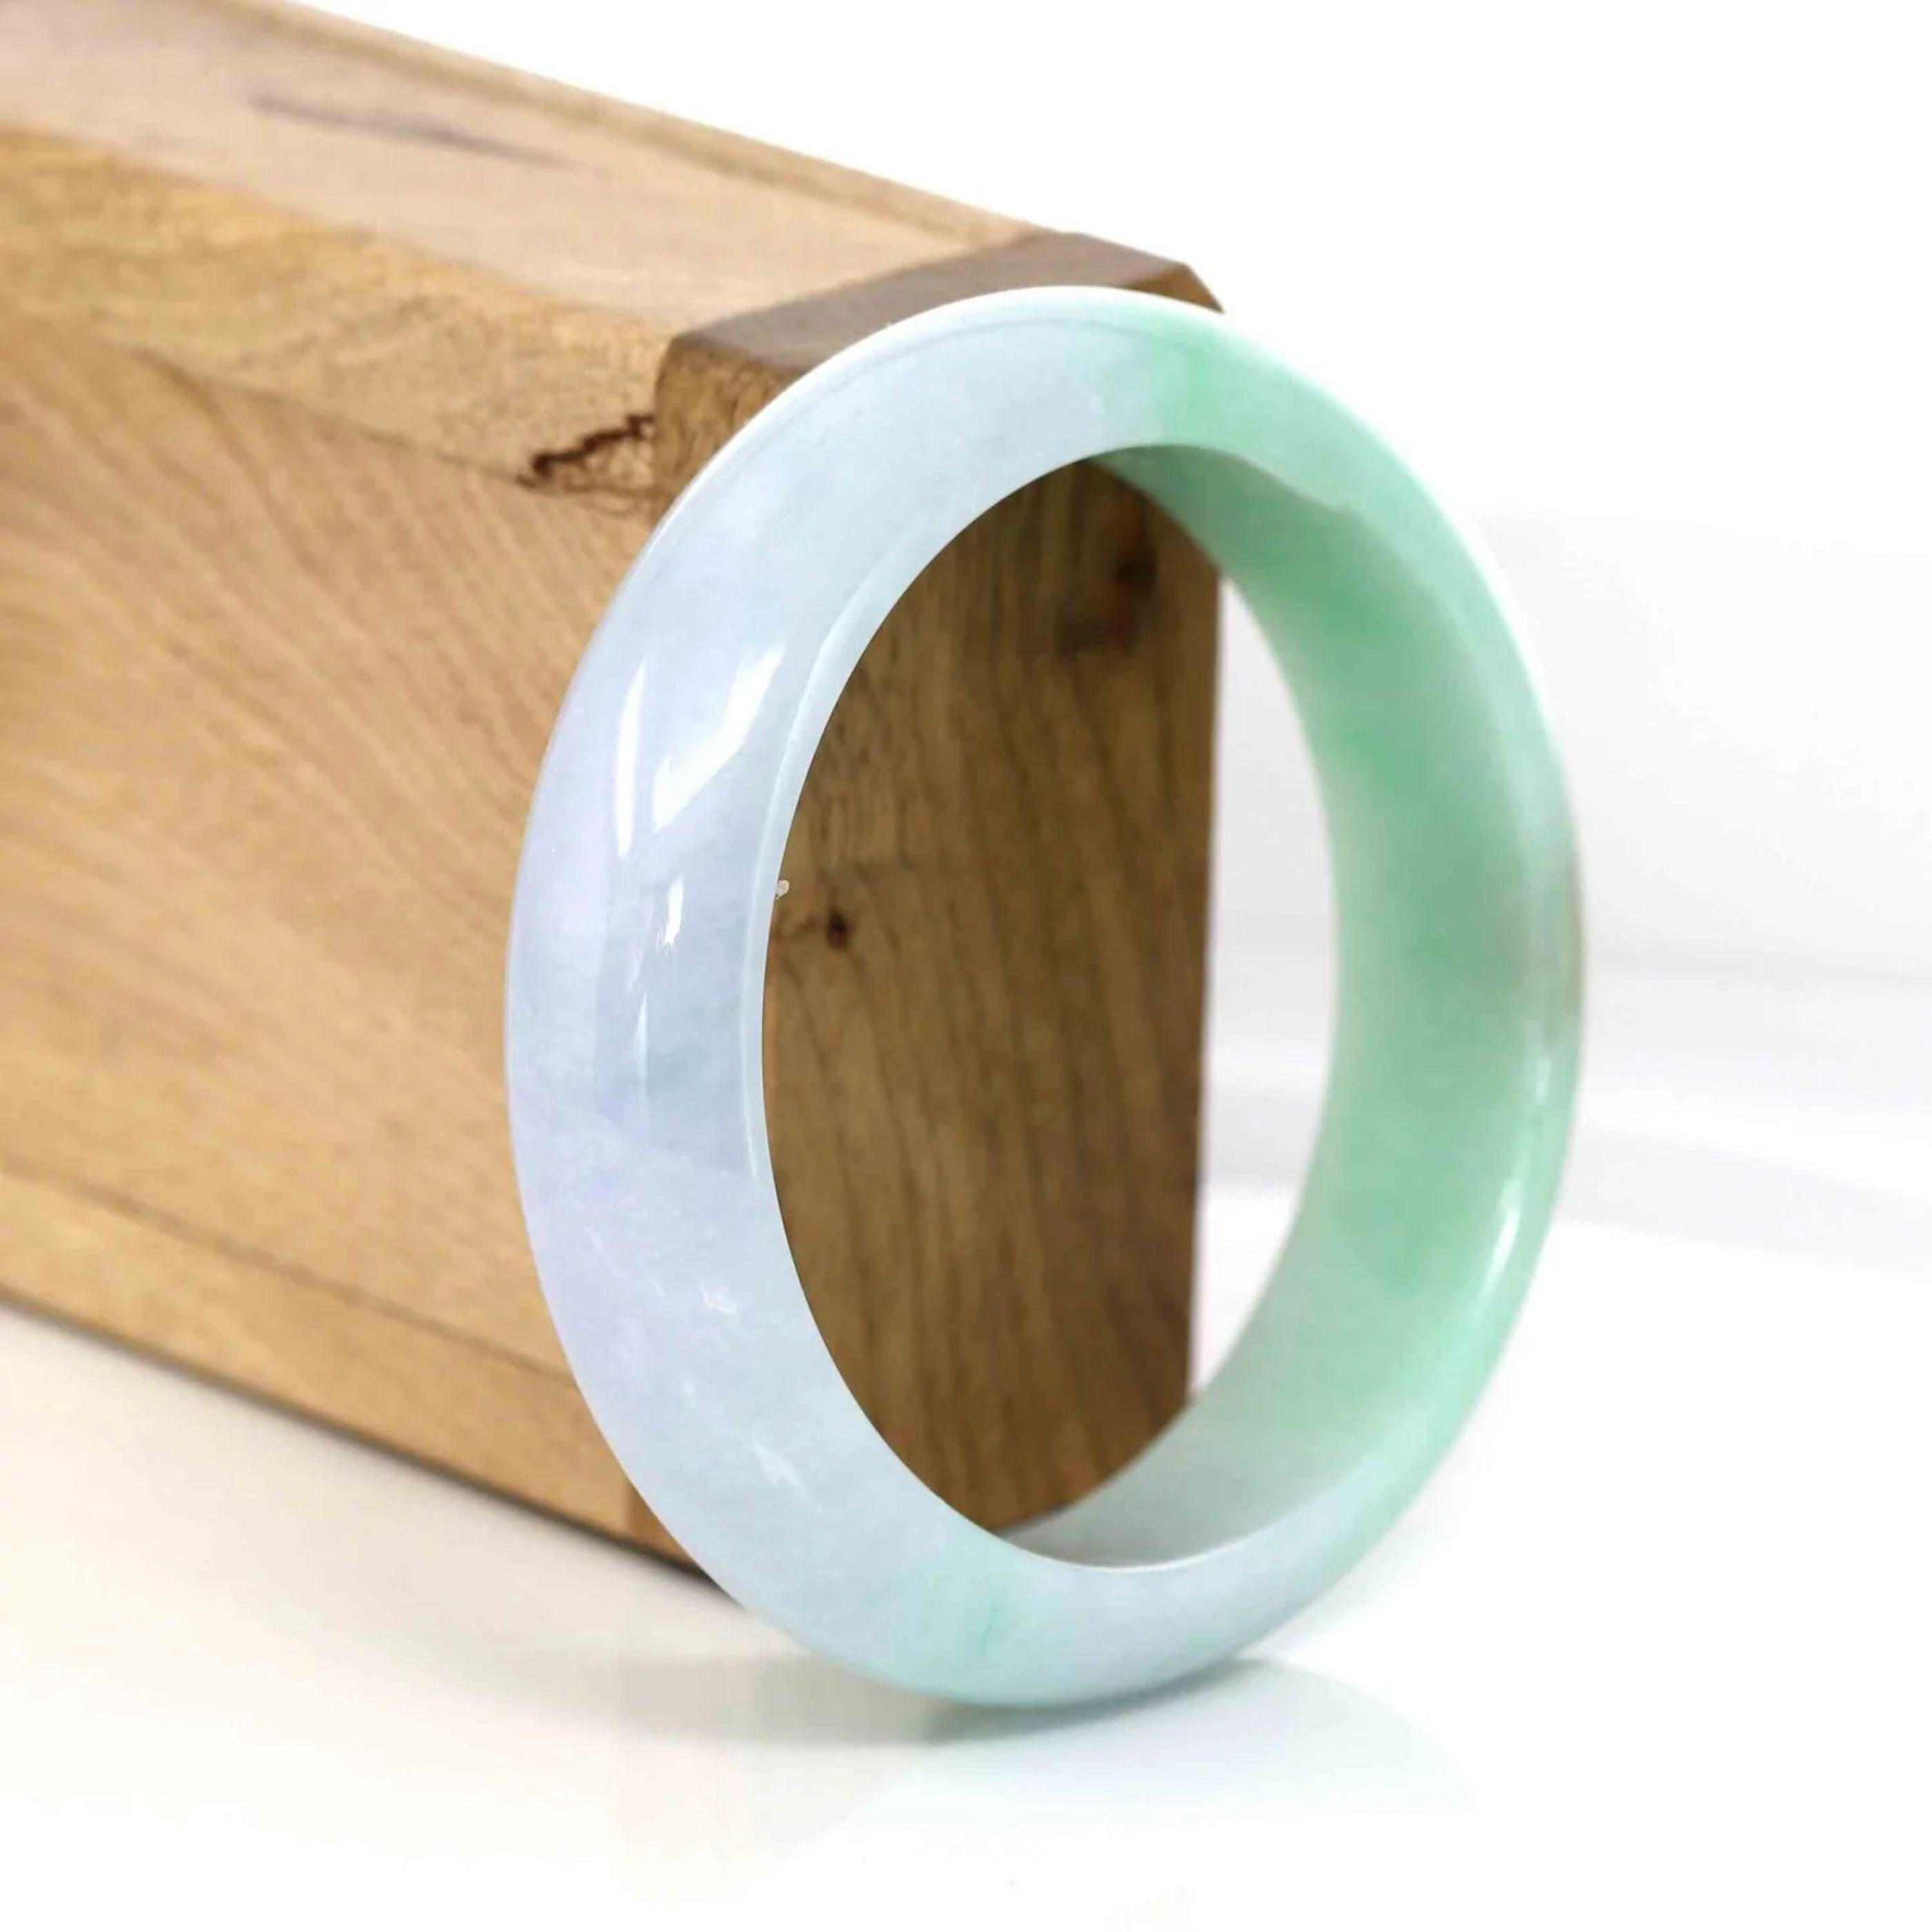 * DETAILS--- Genuine Burmese Jadeite Jade Bangle Bracelet. This bangle is made with very high quality genuine Burmese Jadeite jade. The jade texture is very smooth and translucent with green-lavender, a part of yellow color. It is a luxury and